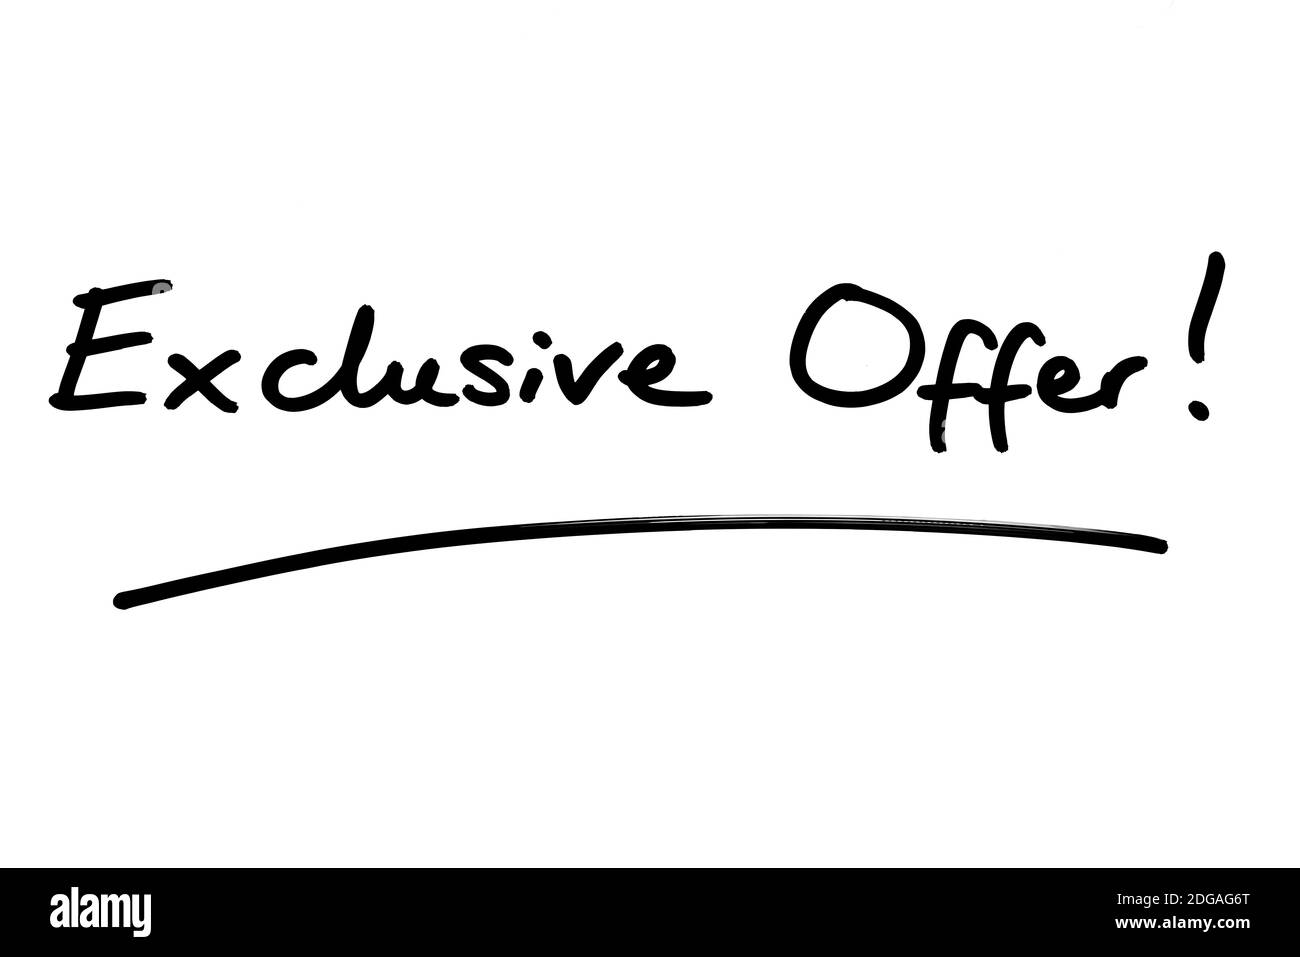 Exclusive Offer! handwritten on a white background. Stock Photo